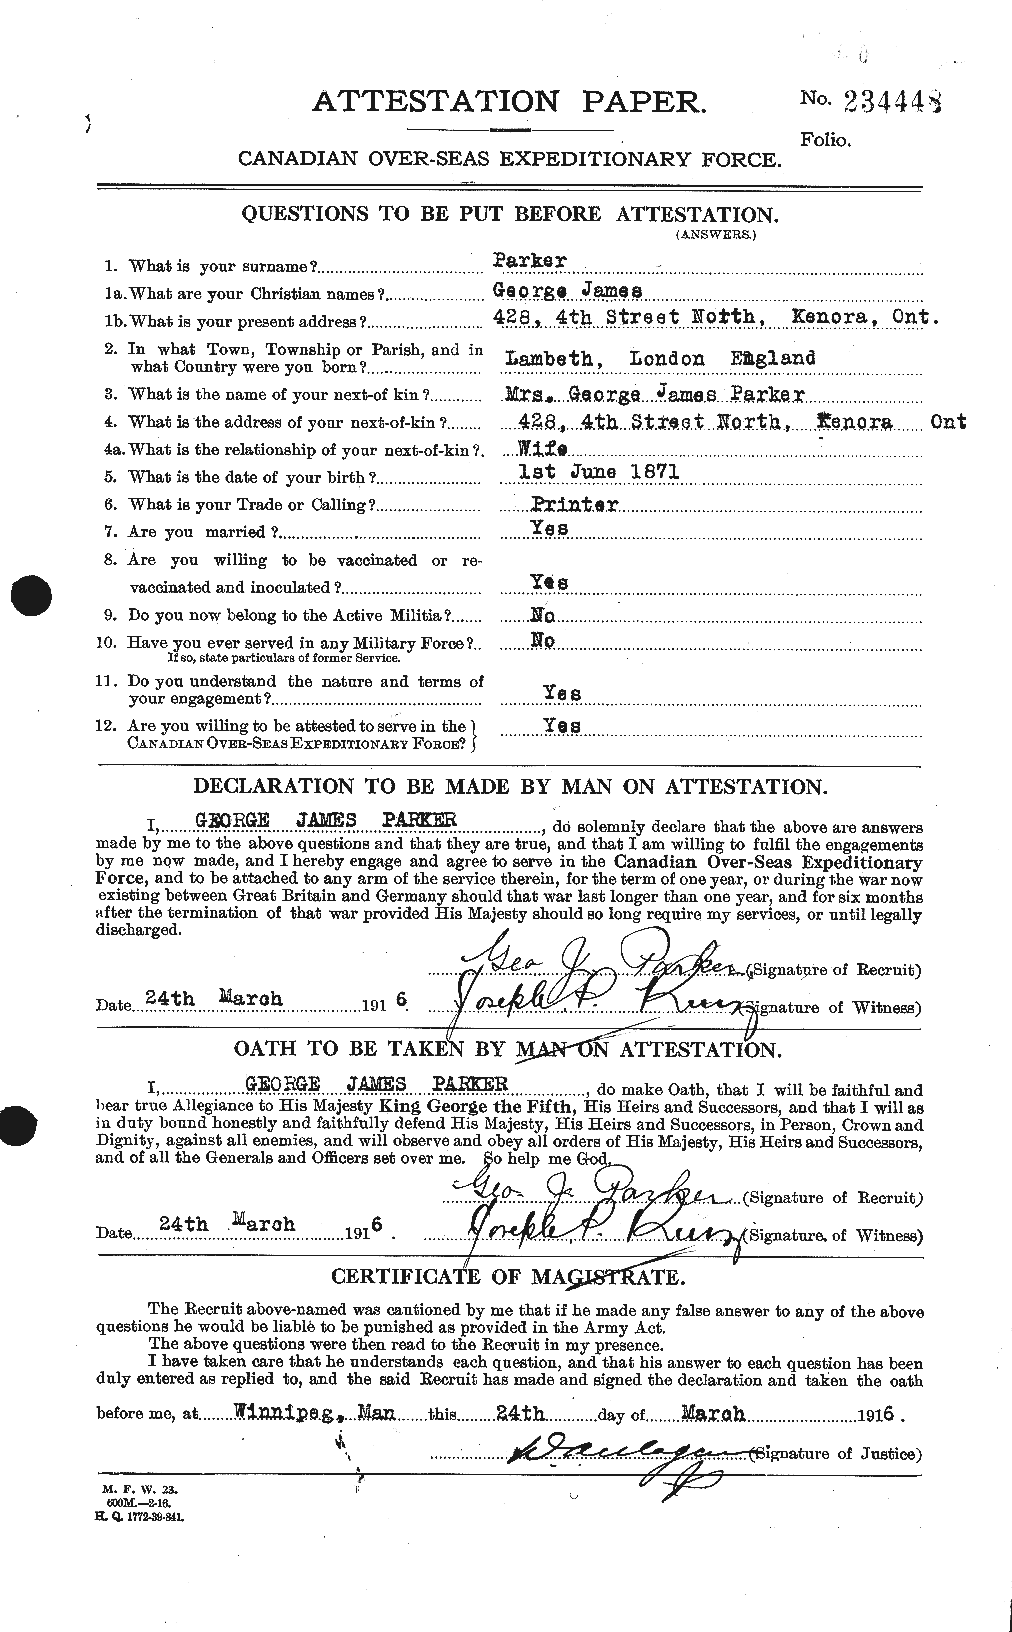 Personnel Records of the First World War - CEF 565268a